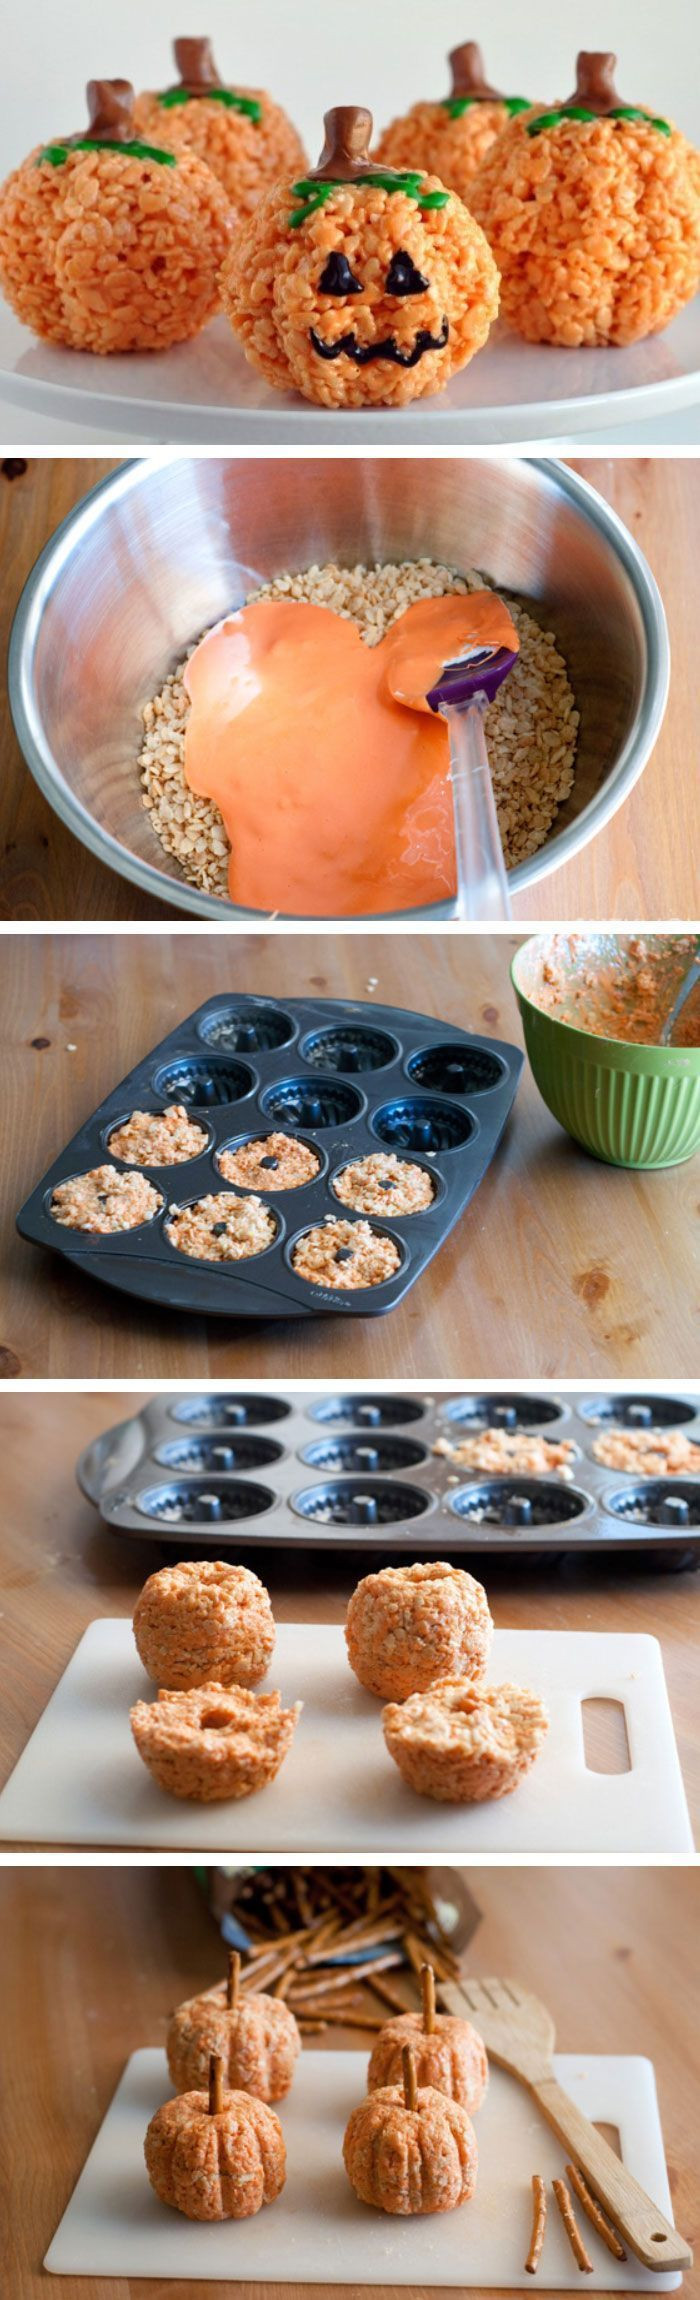 Halloween Party Foods For Kids
 20 best images about Must make sweets on Pinterest